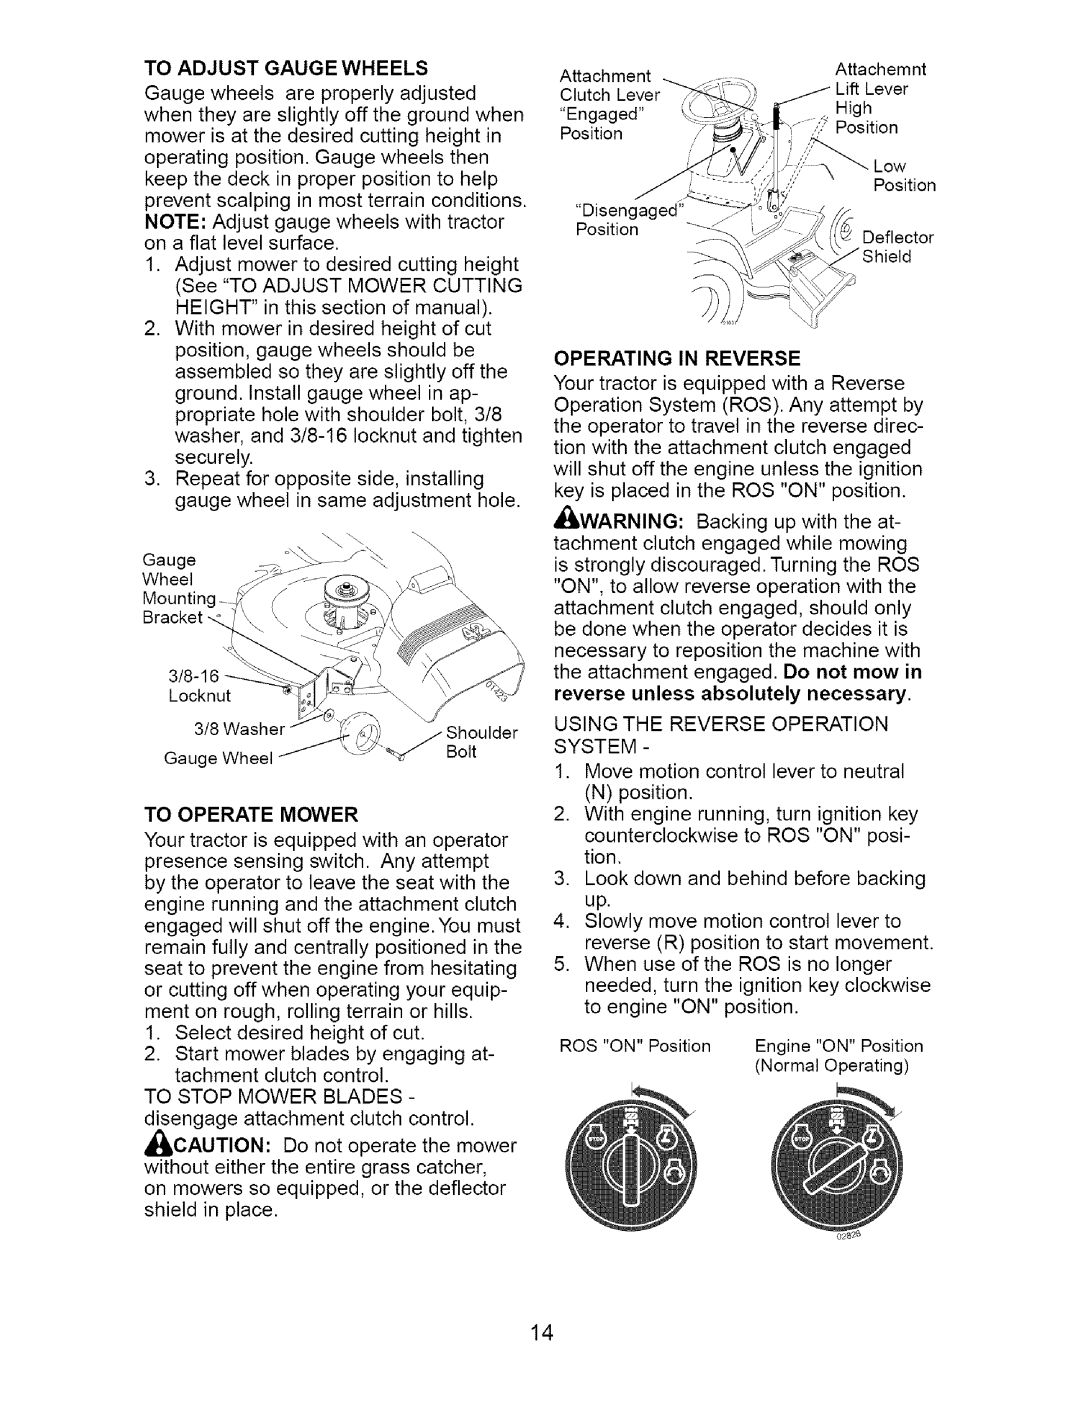 Craftsman 917.274762 owner manual Using The Reverse Operation System 